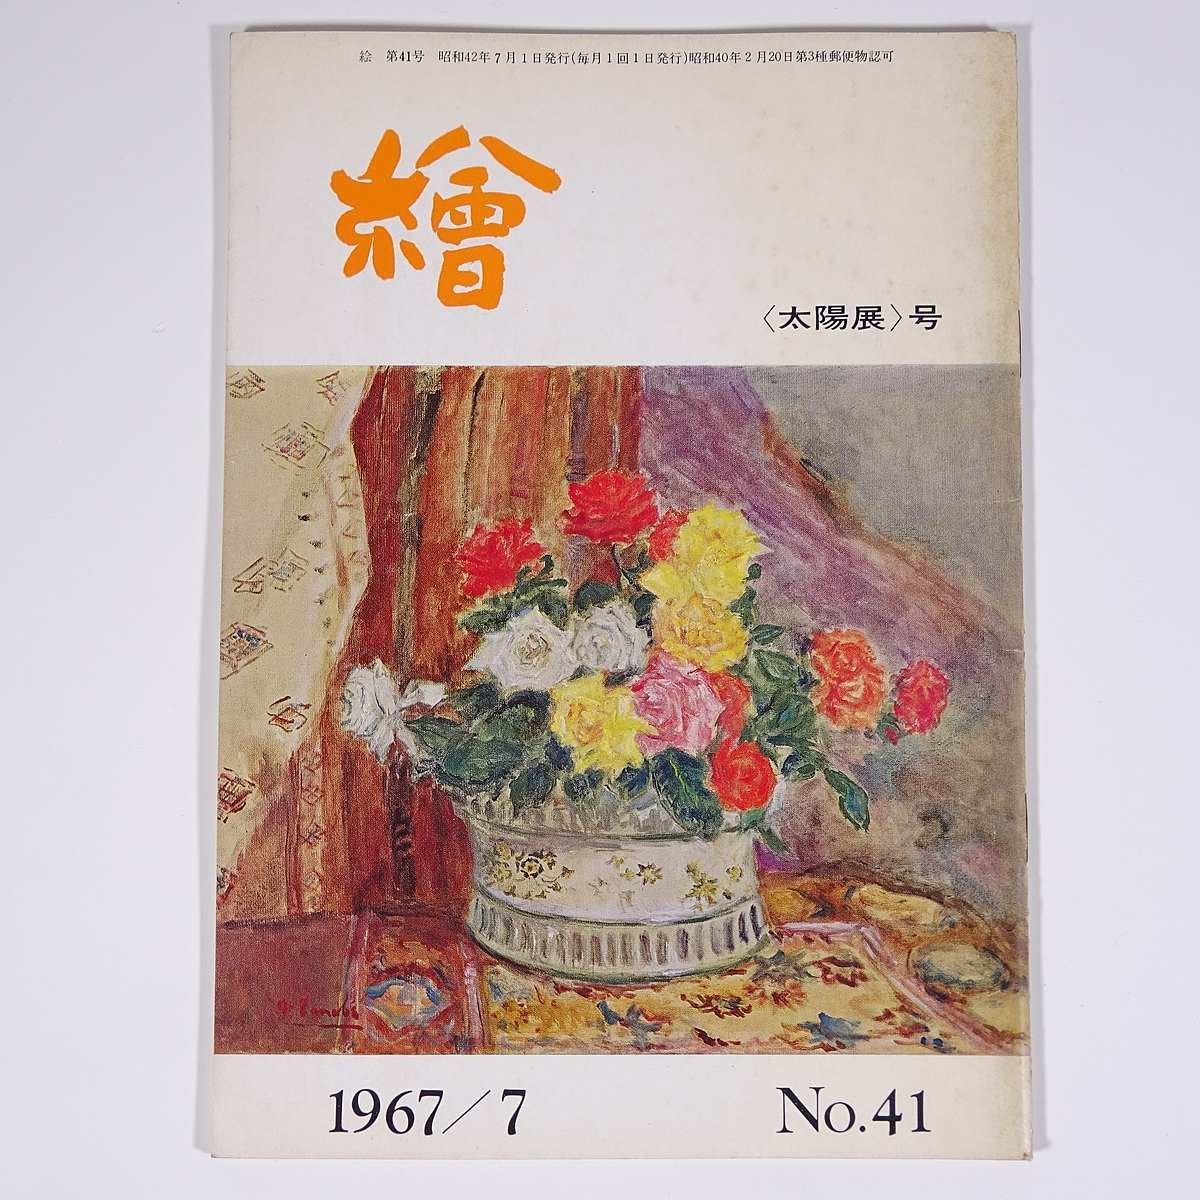 Monthly magazine, Painting, No. 41, July 1967, Nihondo Gallery, Booklet, Art, Fine art, Painting, Special feature: The Sun Exhibition, Flowers, Flowers and Painting, Remembering Redon's Flowers, etc., magazine, art, Entertainment, Painting